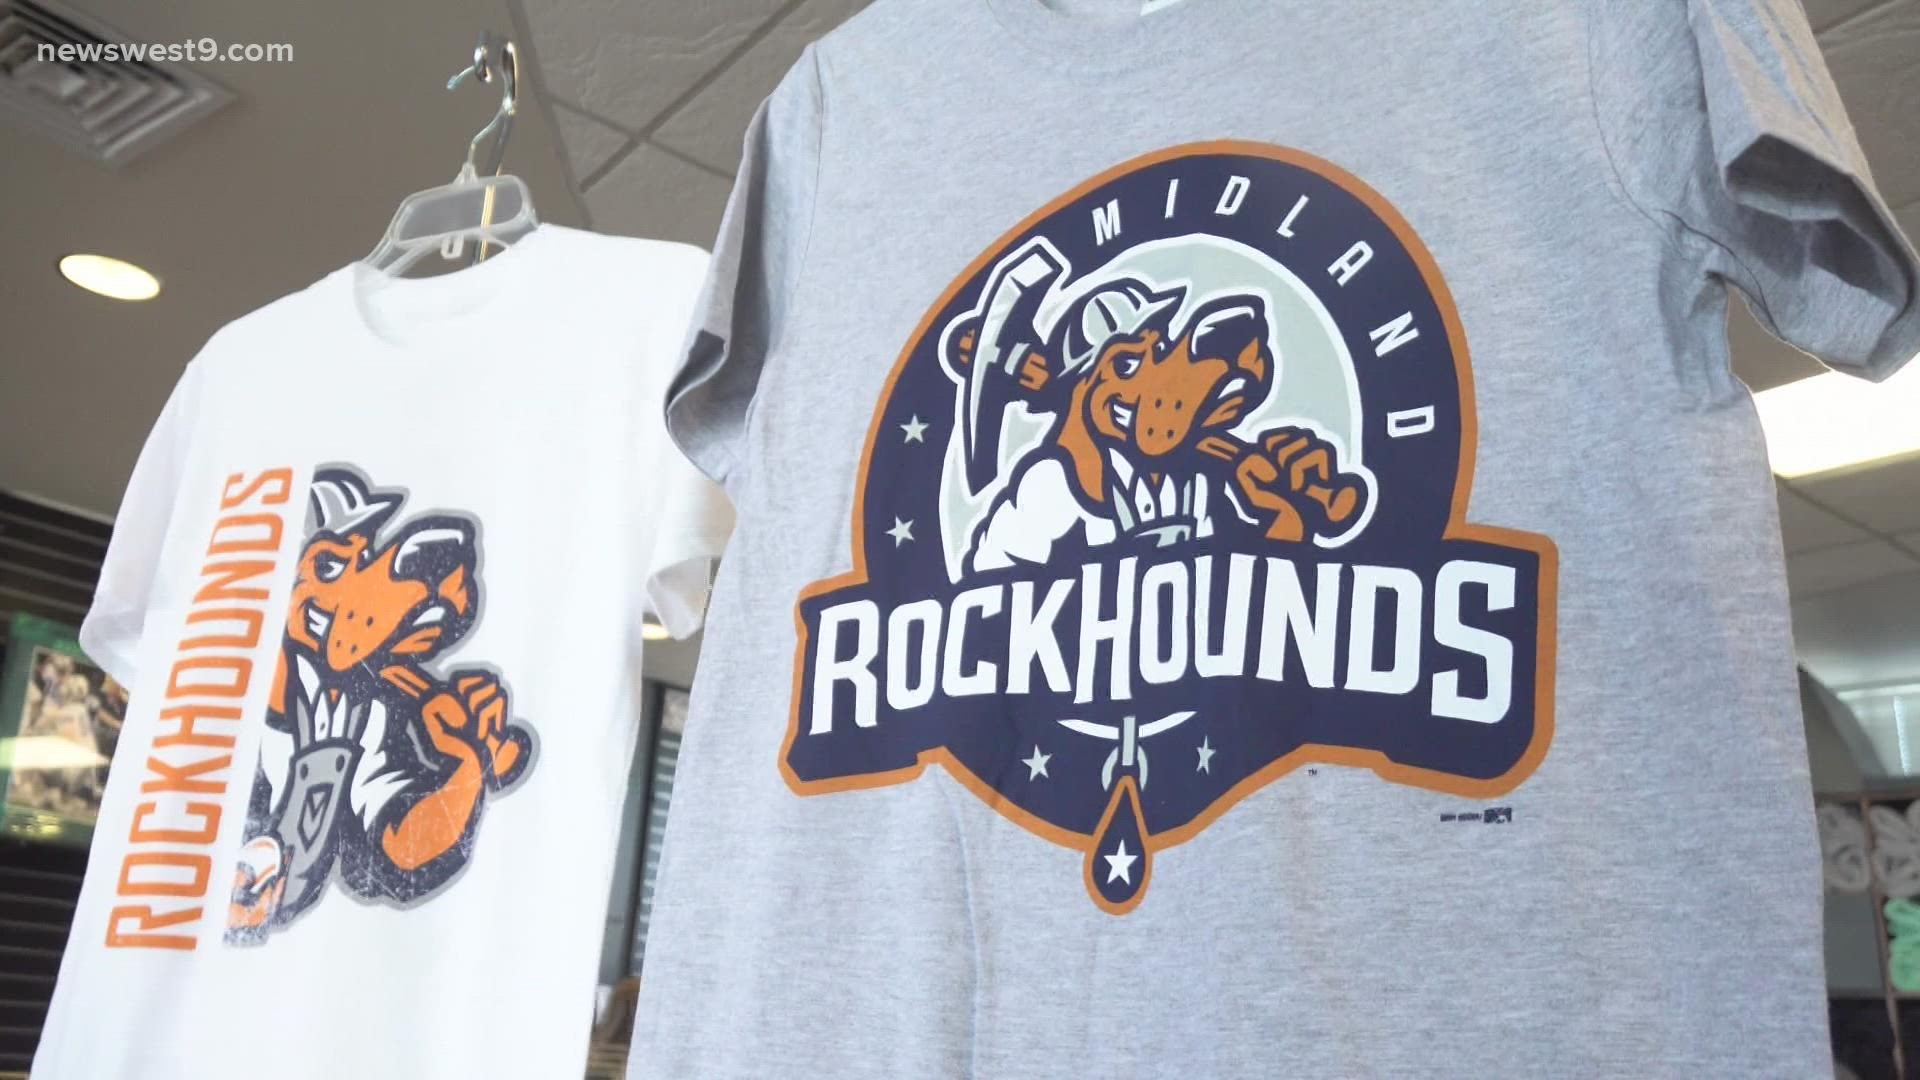 This is the first change to the team's branding since the adoption of the RockHounds name in 1999.